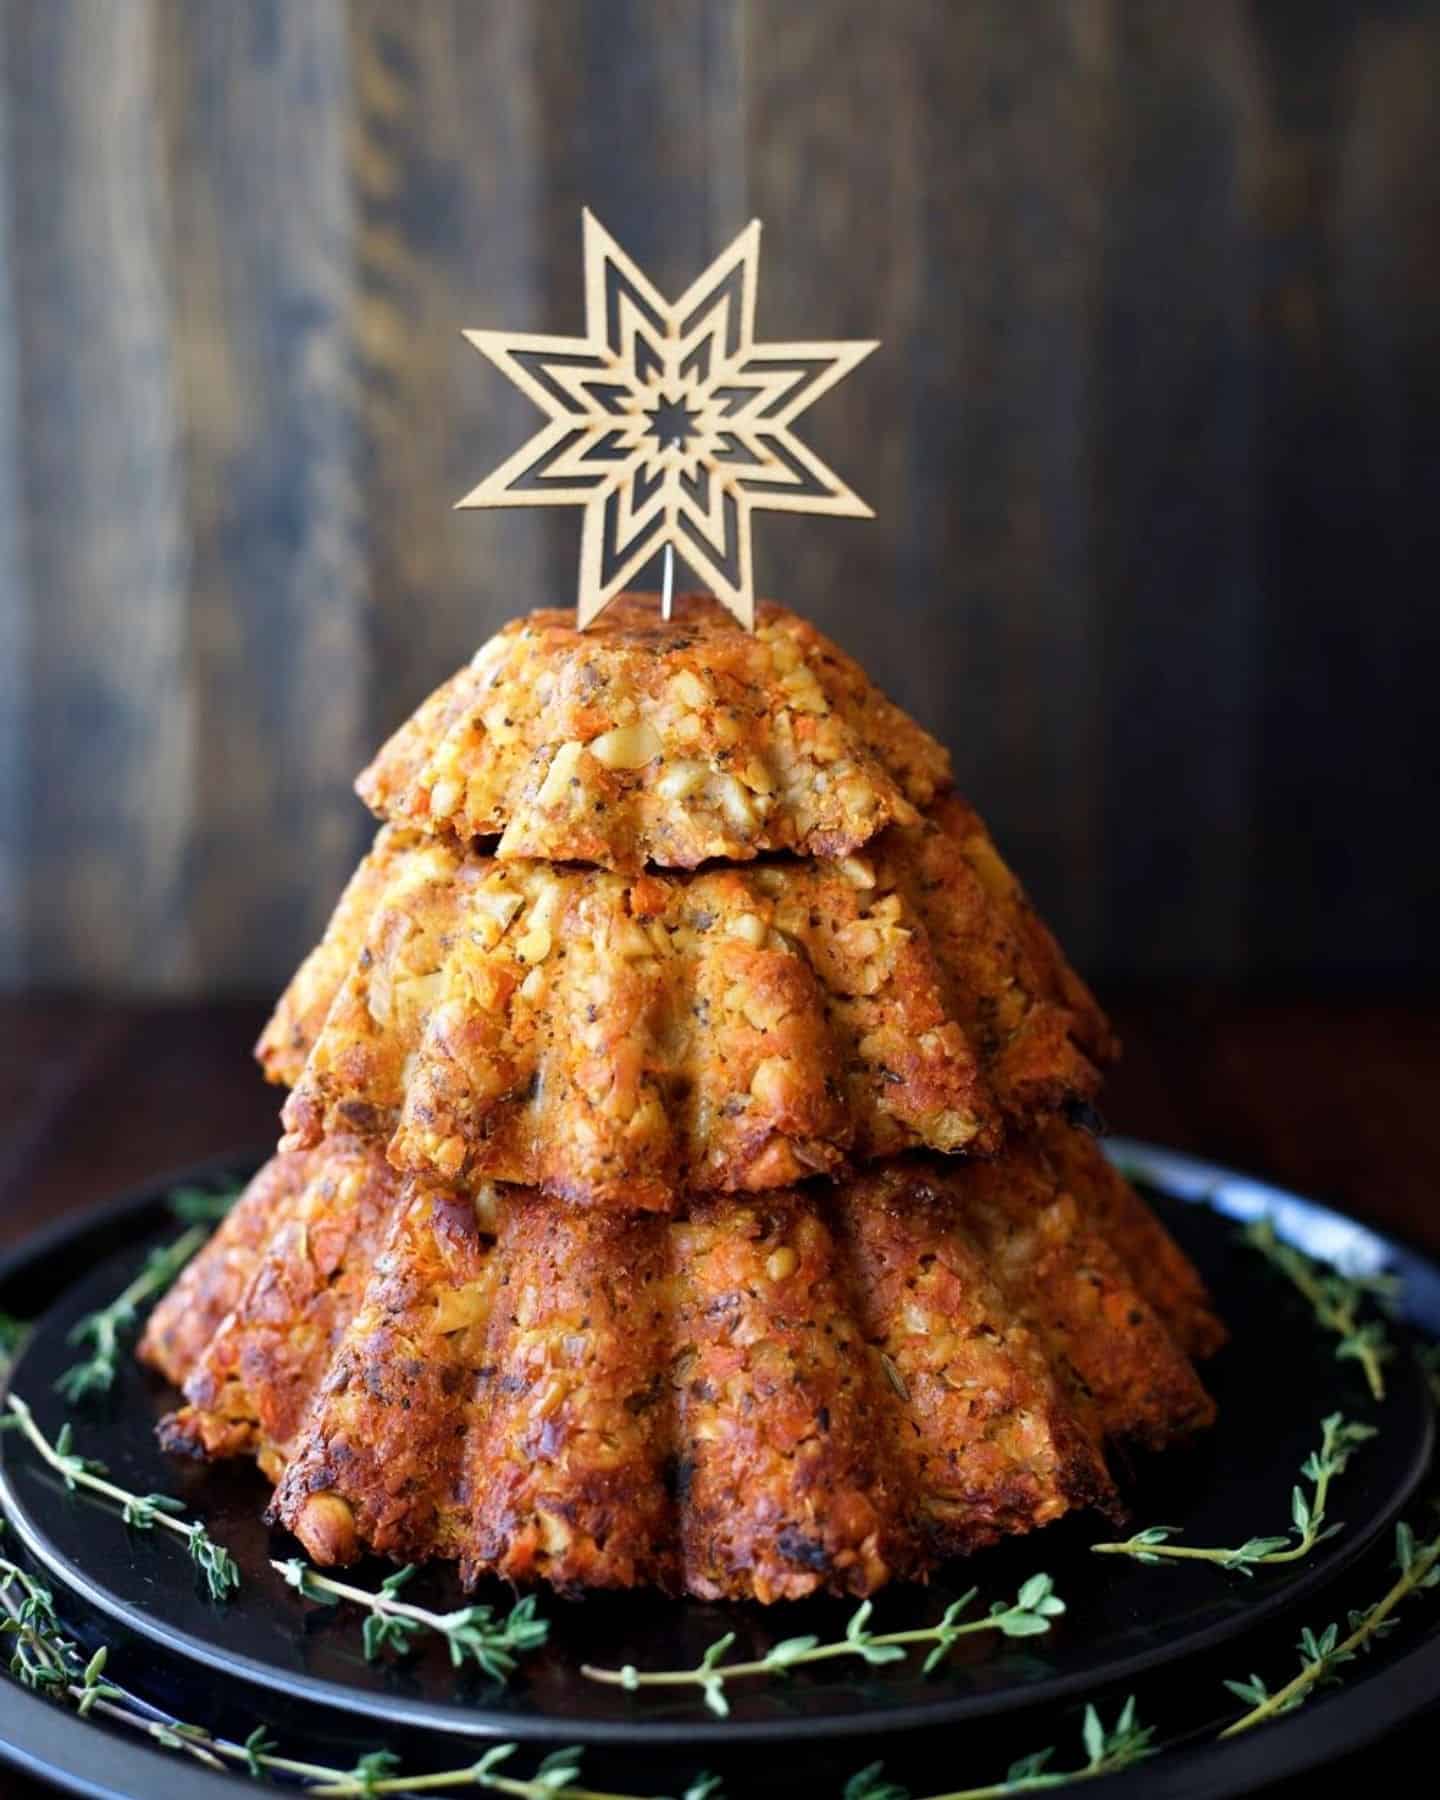 Nut roast in the shape of a Christmas tree topped with a star and fresh thyme around the bottom